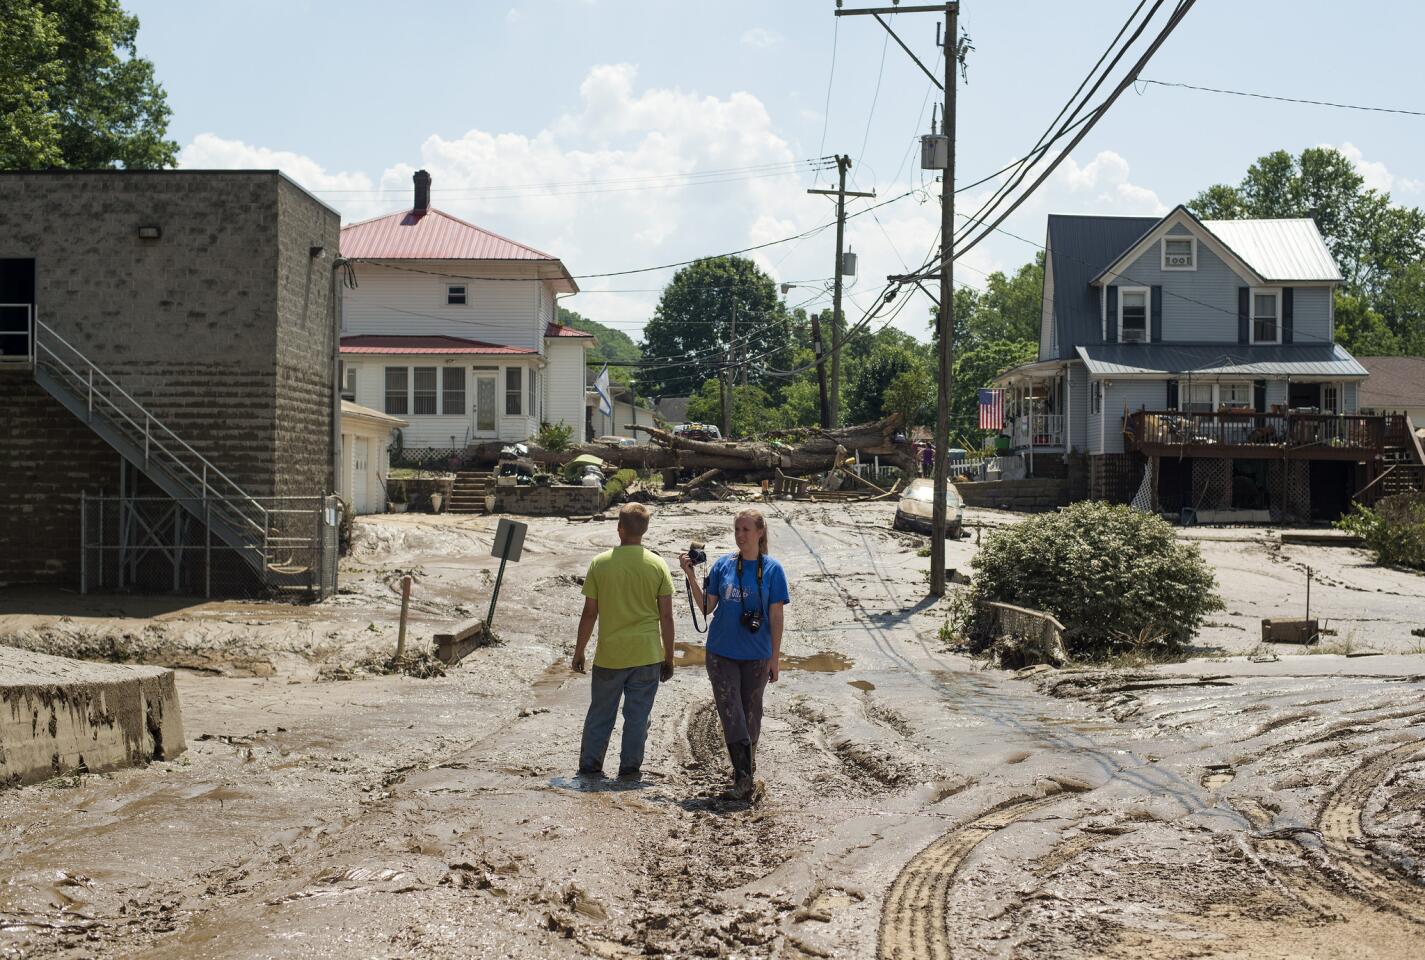 People stand in the middle of a mud-covered street in Clendenin, W. Va., after the Elk River flooded.